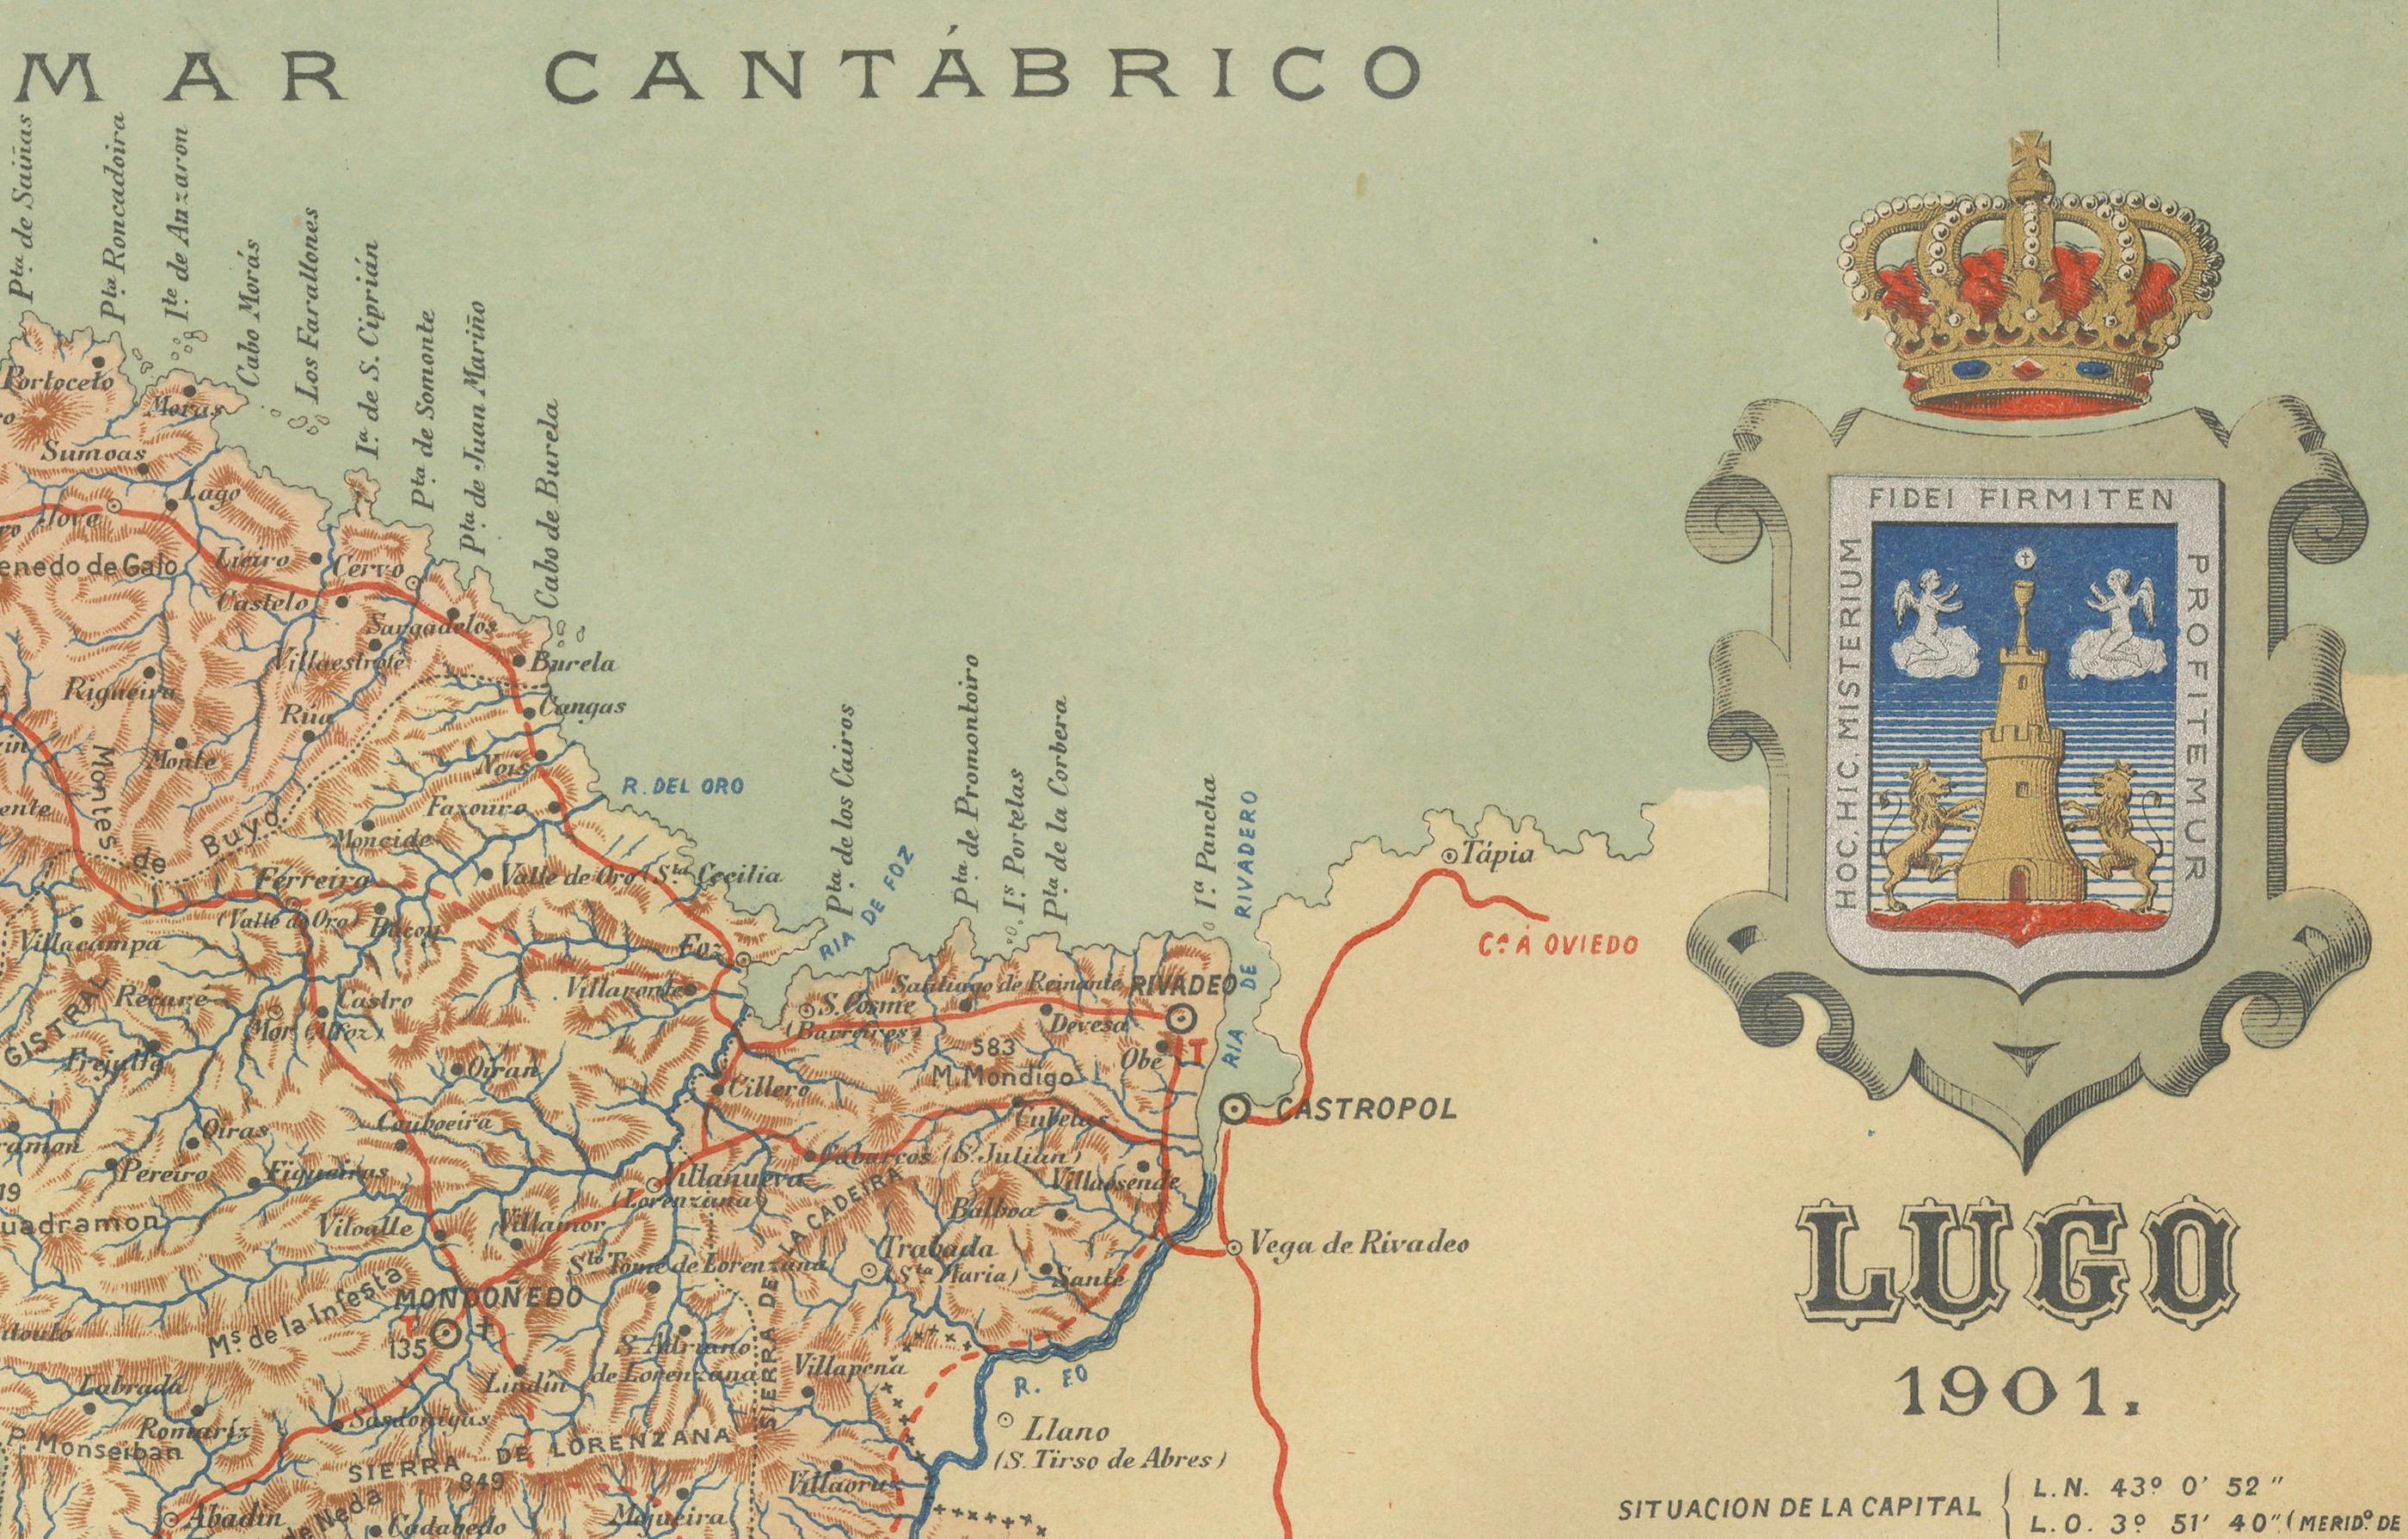 Paper Lugo 1901: A Cartographic Chronicle of Galicia's Ancient Roman Walled City For Sale